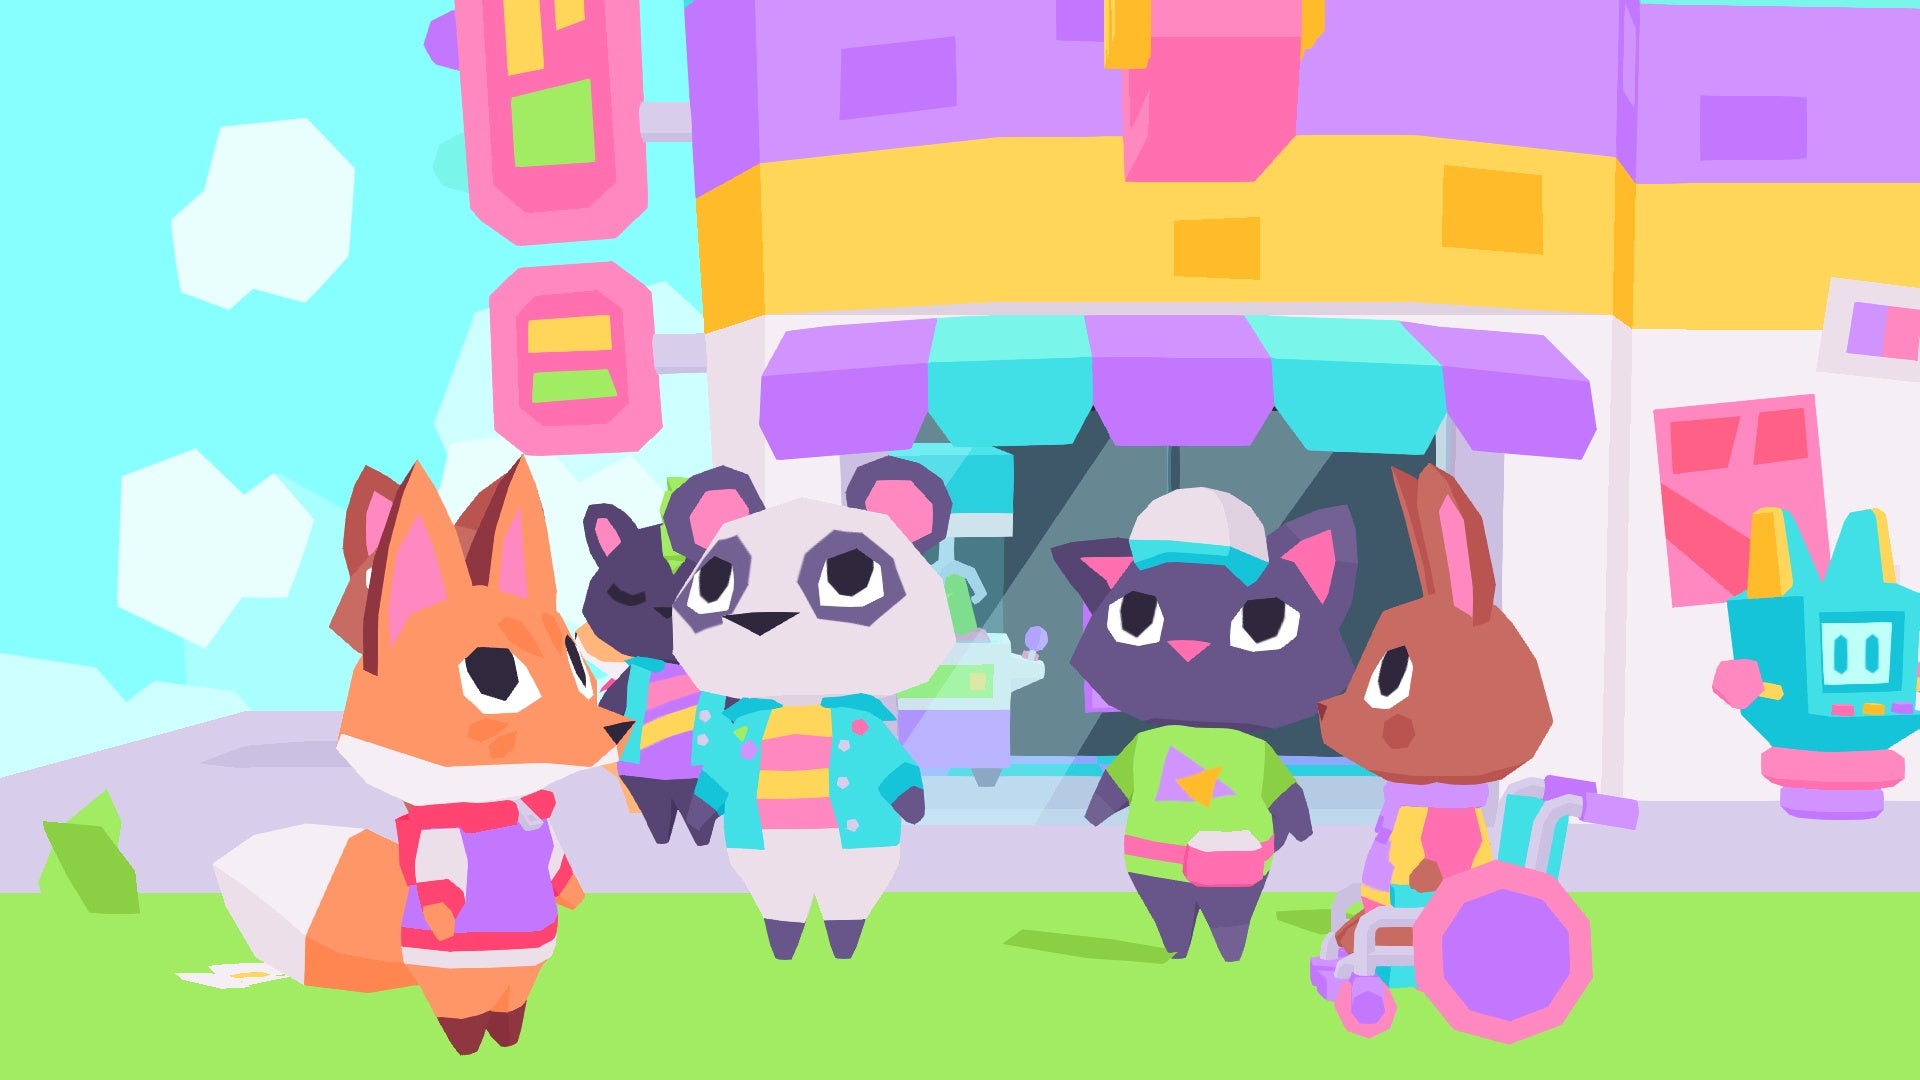 The Fluff Squad meet outside Button City's arcade.